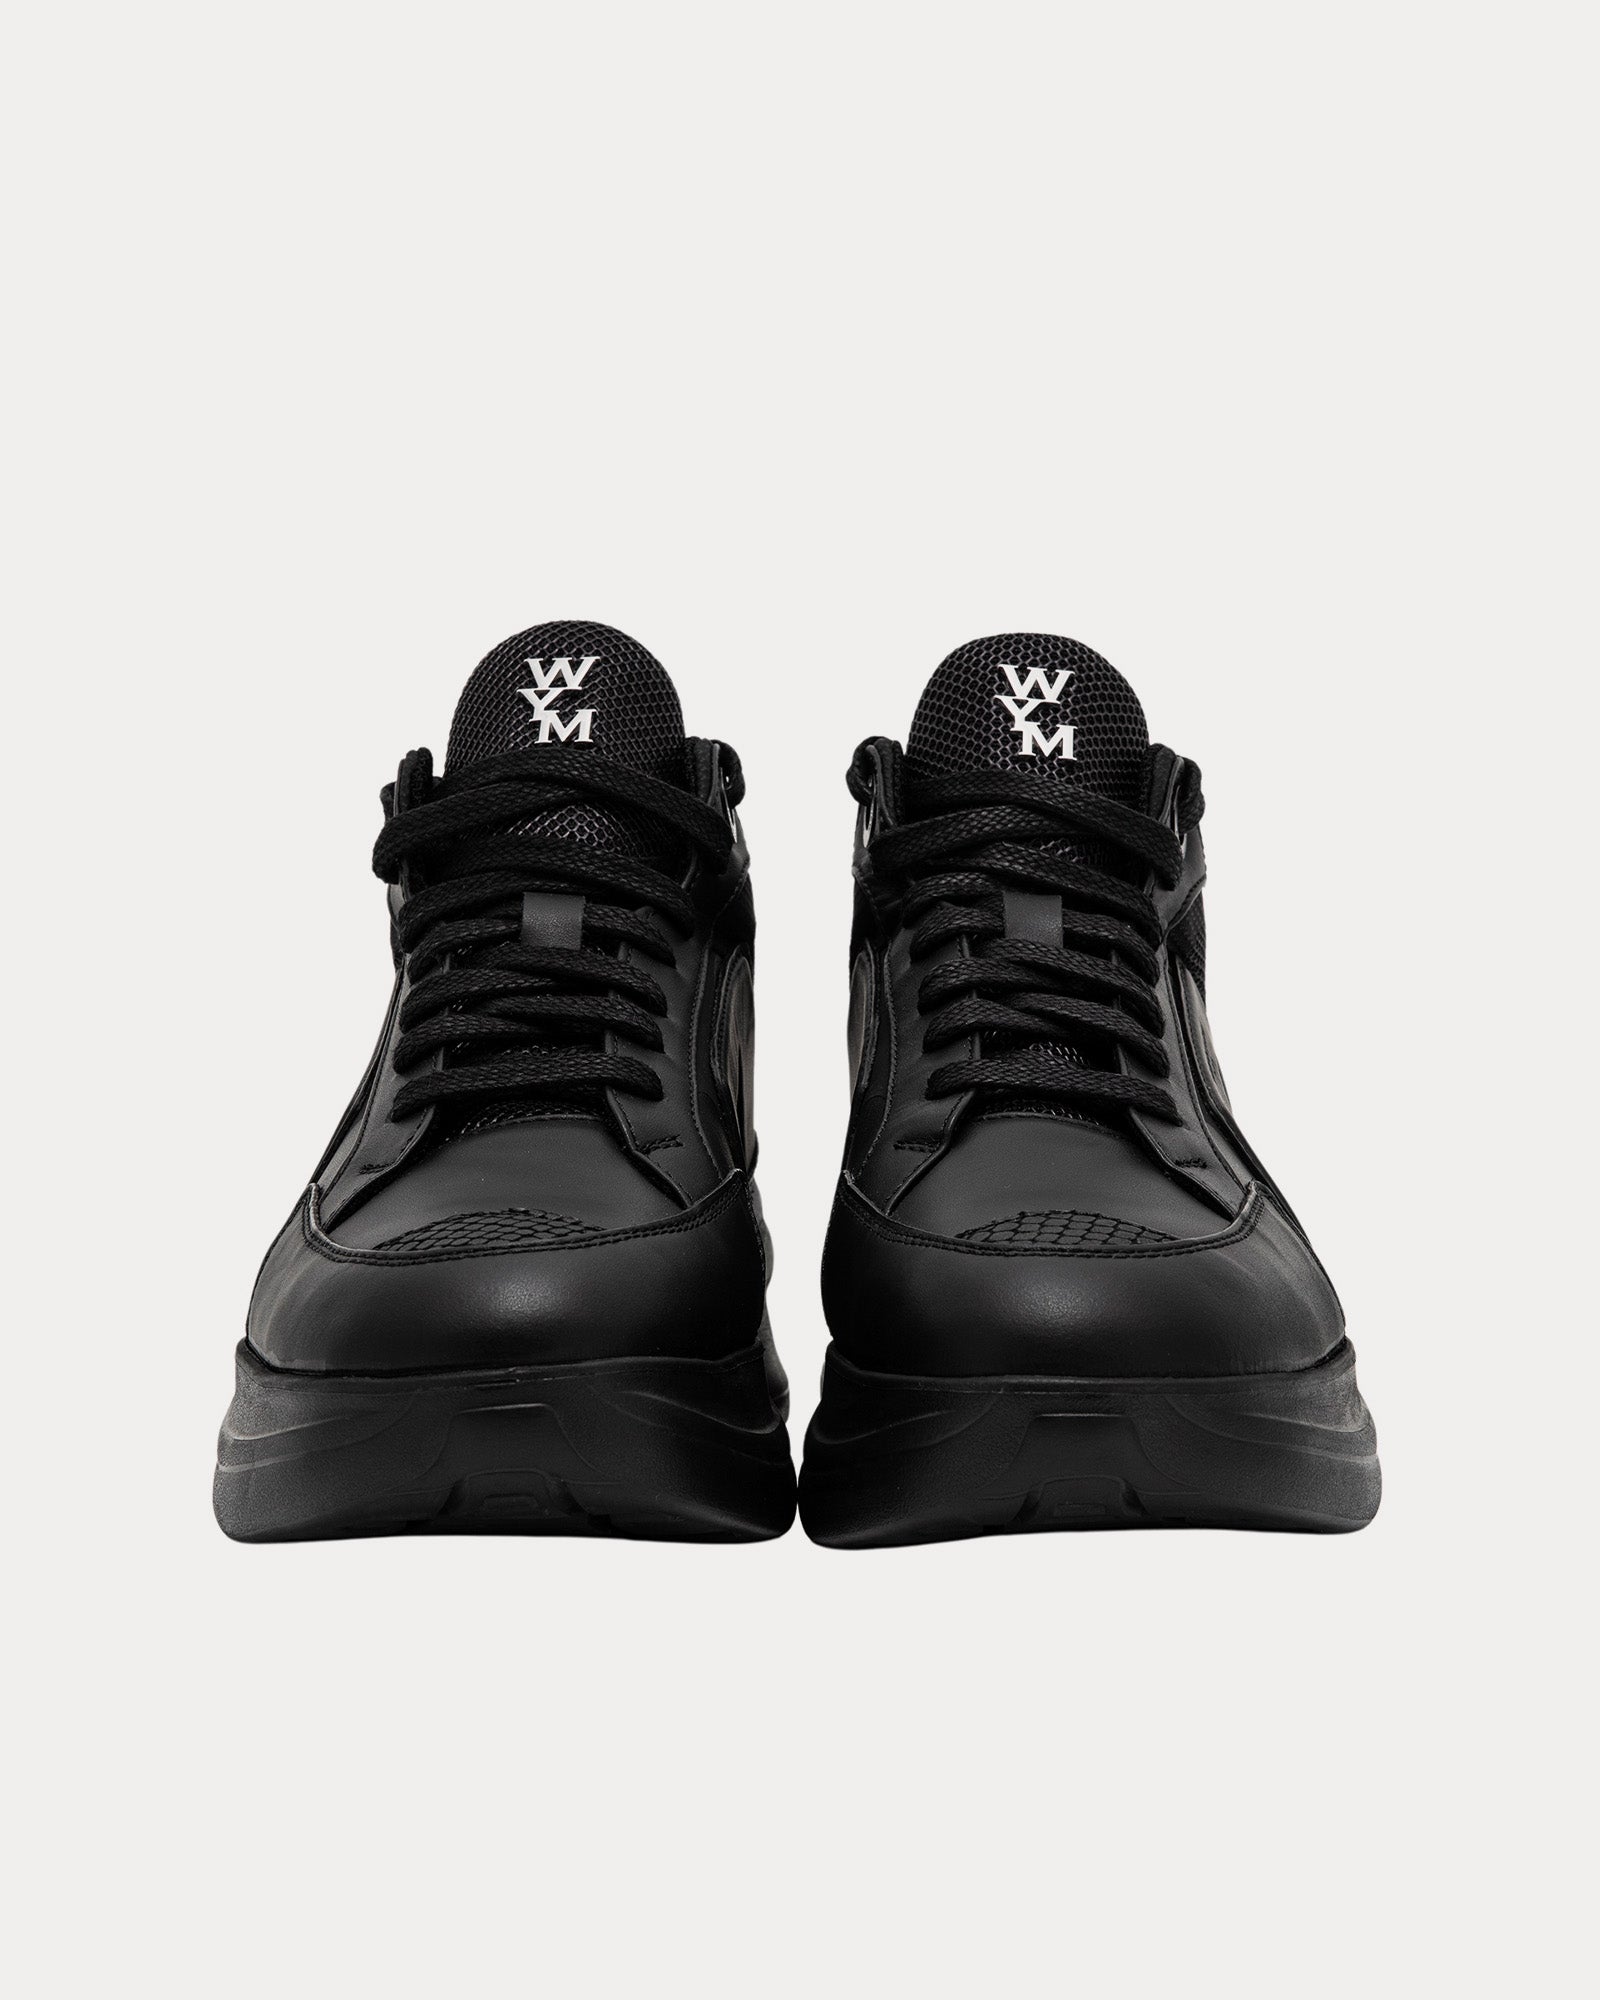 Wooyoungmi - Leather Black High Top Sneakers